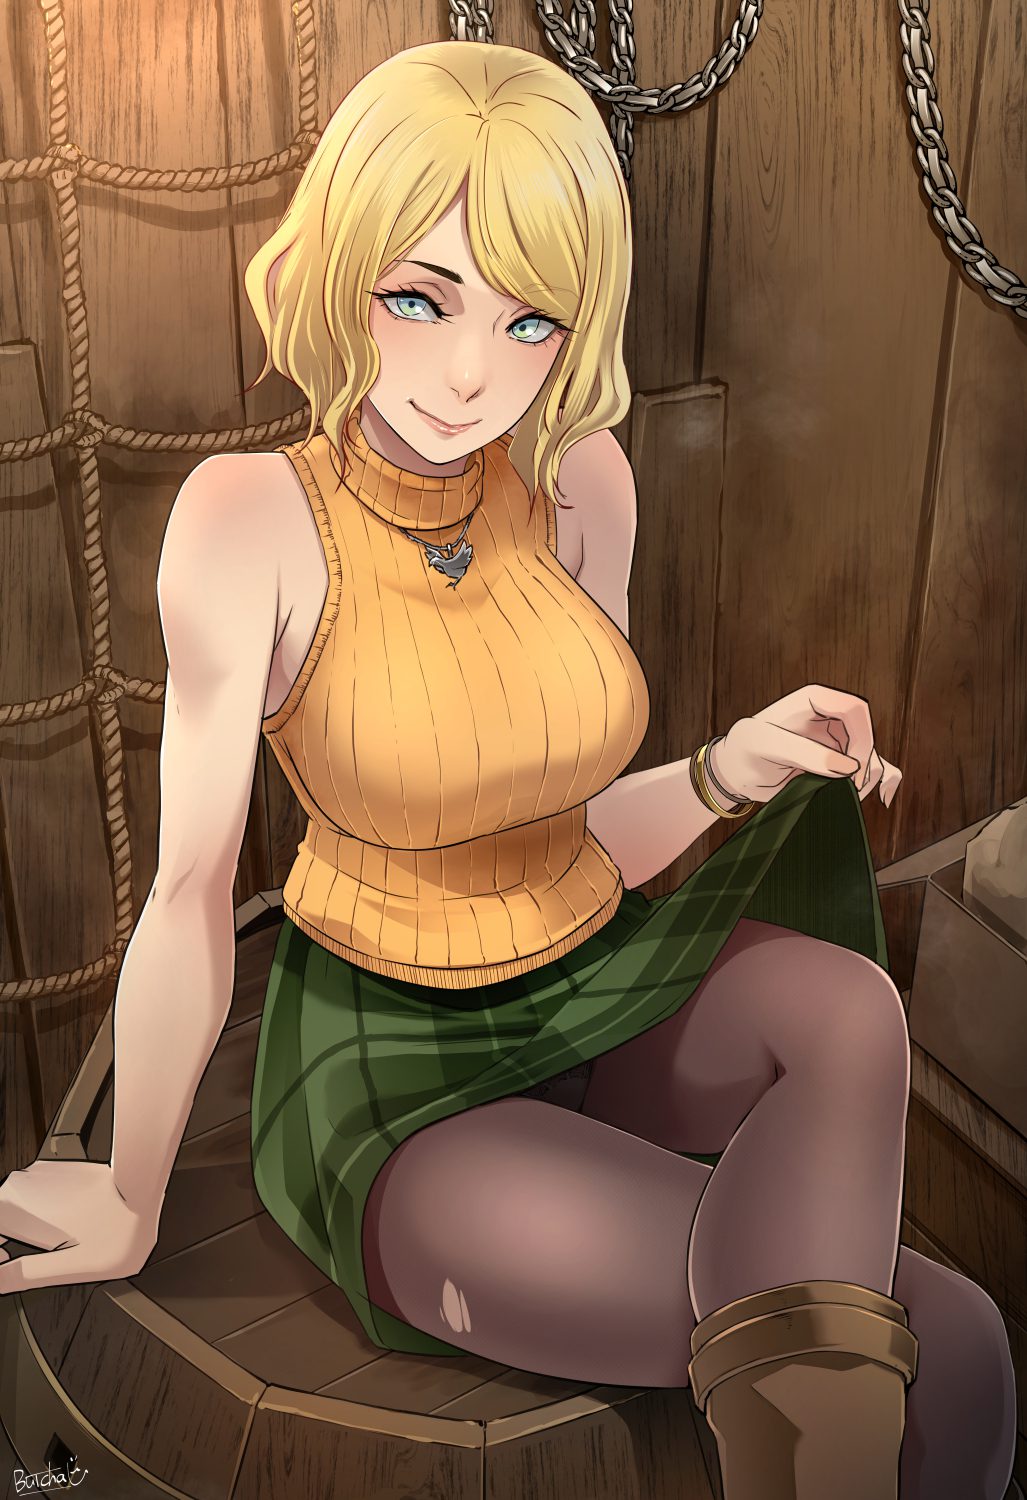 Sweater Anime Porn - Resident Evil Hentai Porn - Sweater, Panties, Skirt, Clothes Lift -  Valorant Porn Gallery